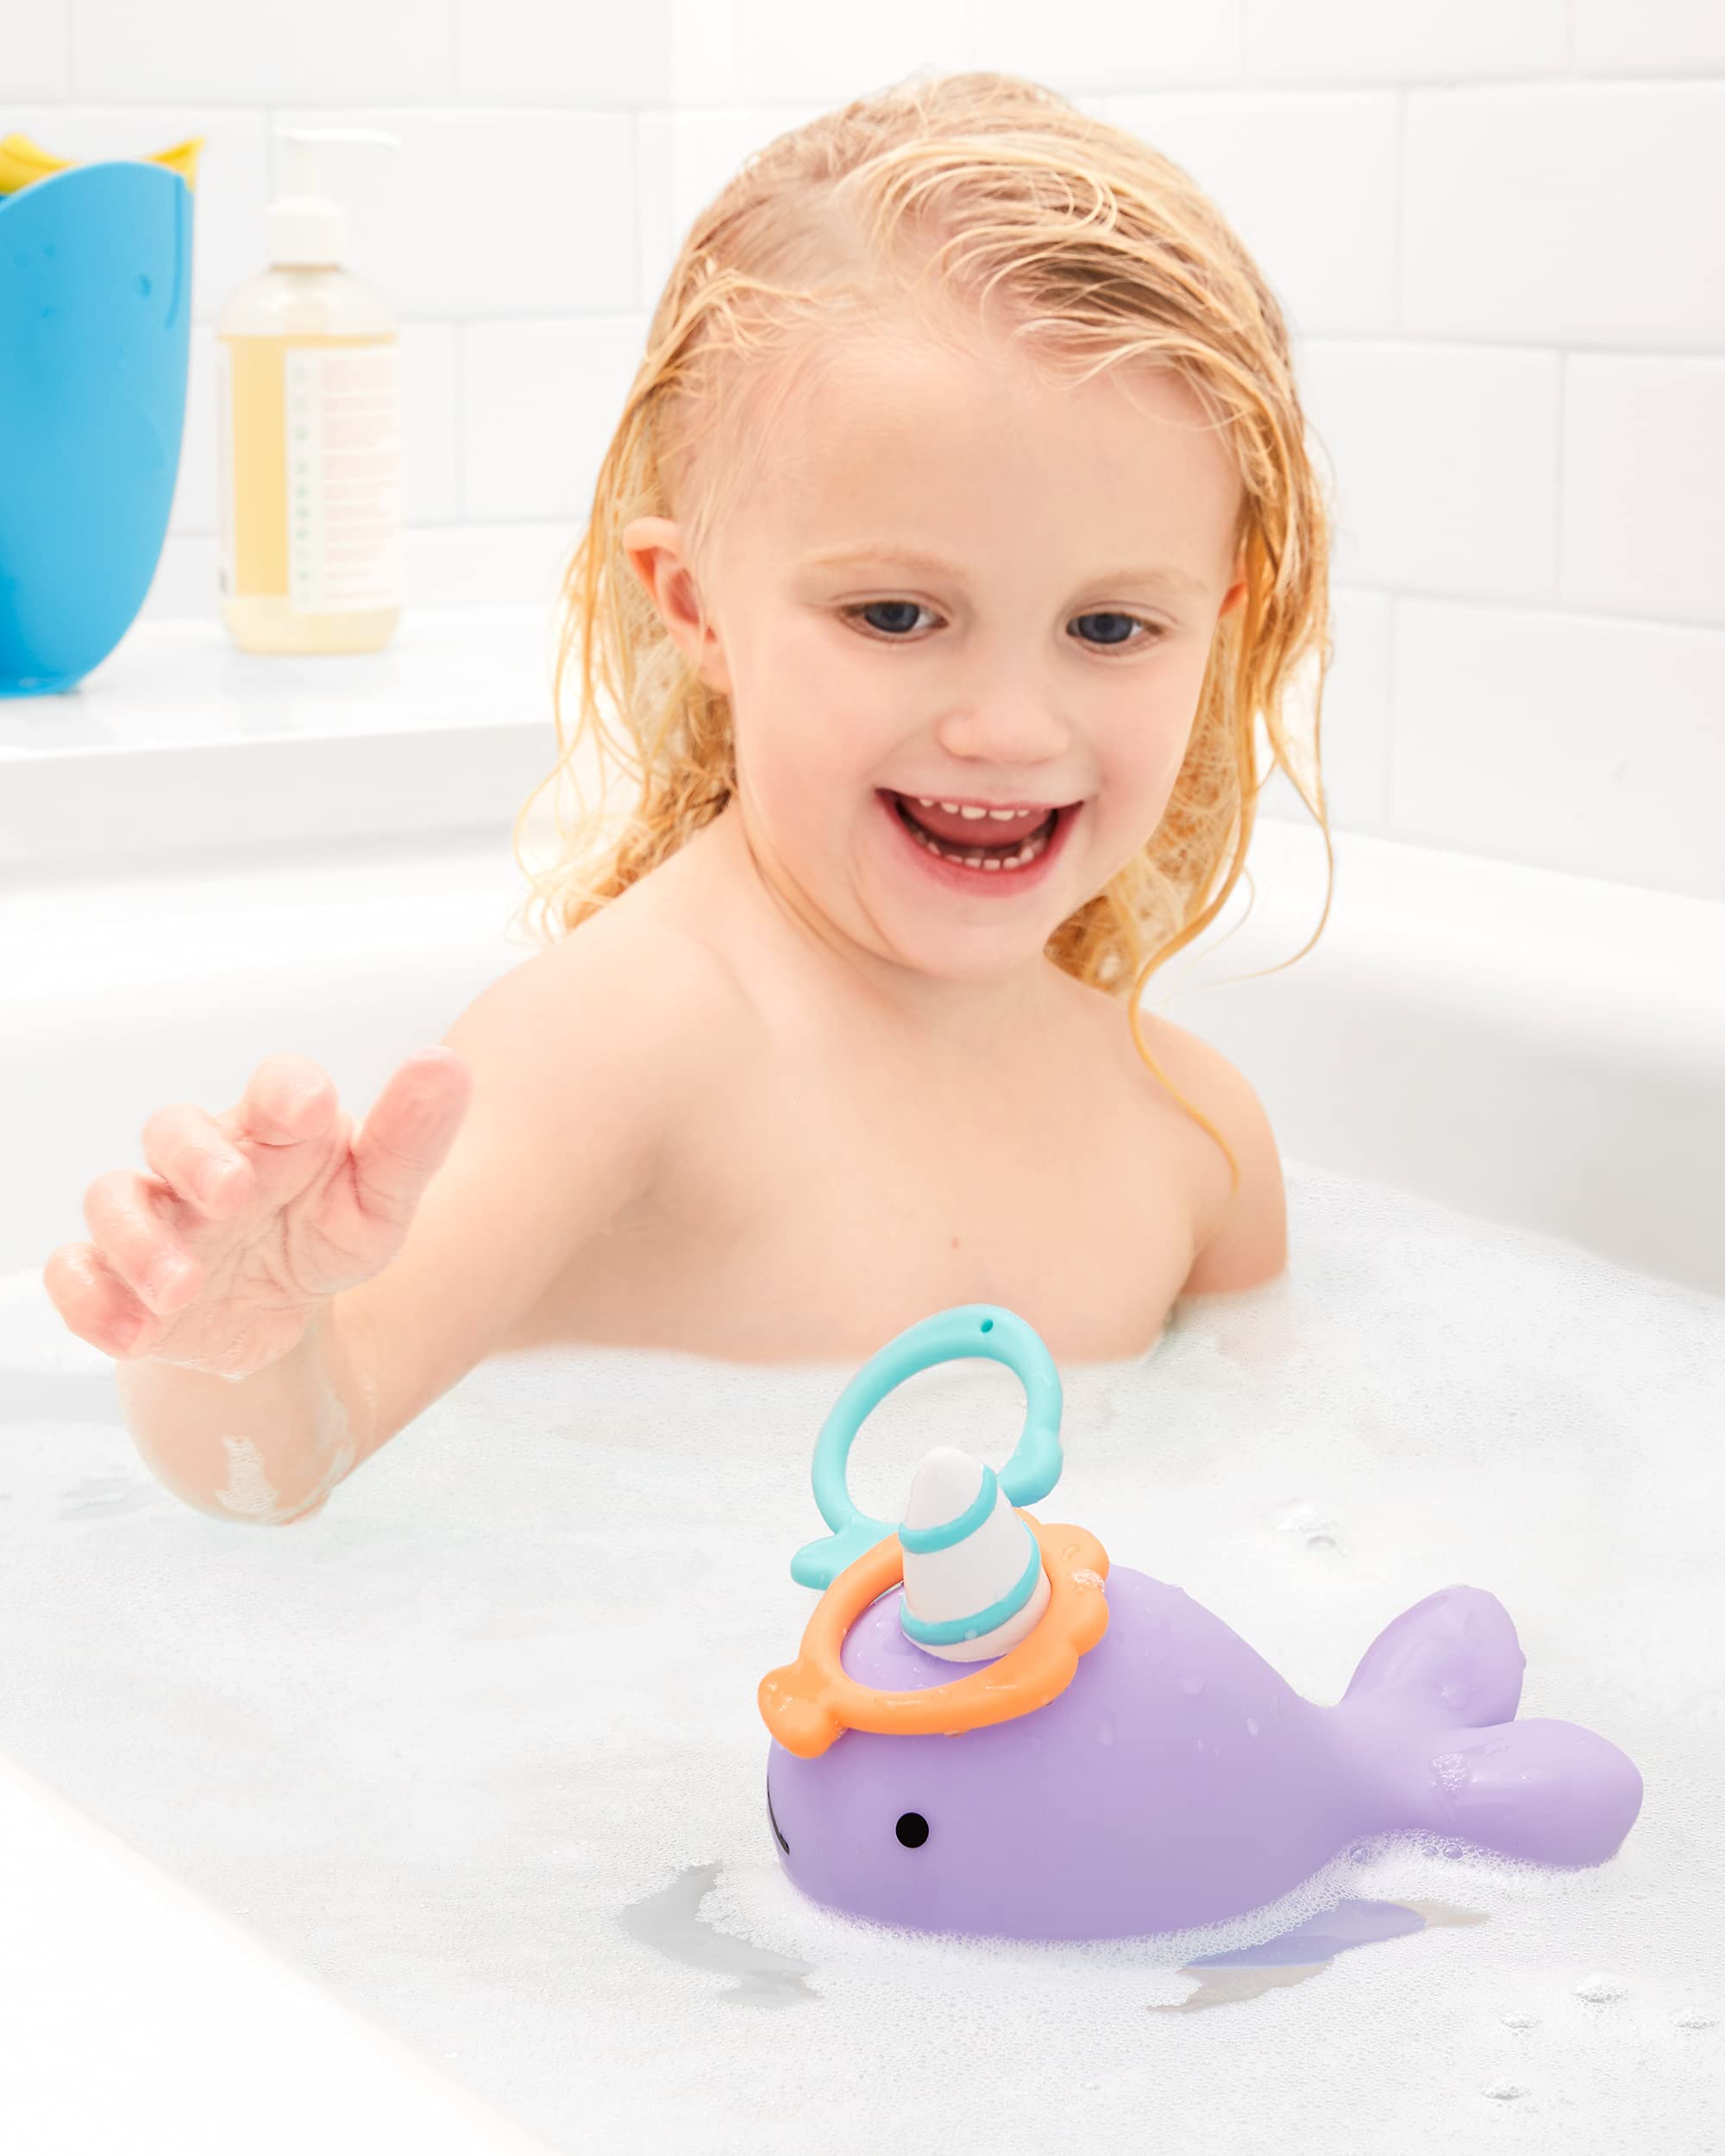 Skip Hop Baby Bath Toy, Zoo Narwhal Ring Toss